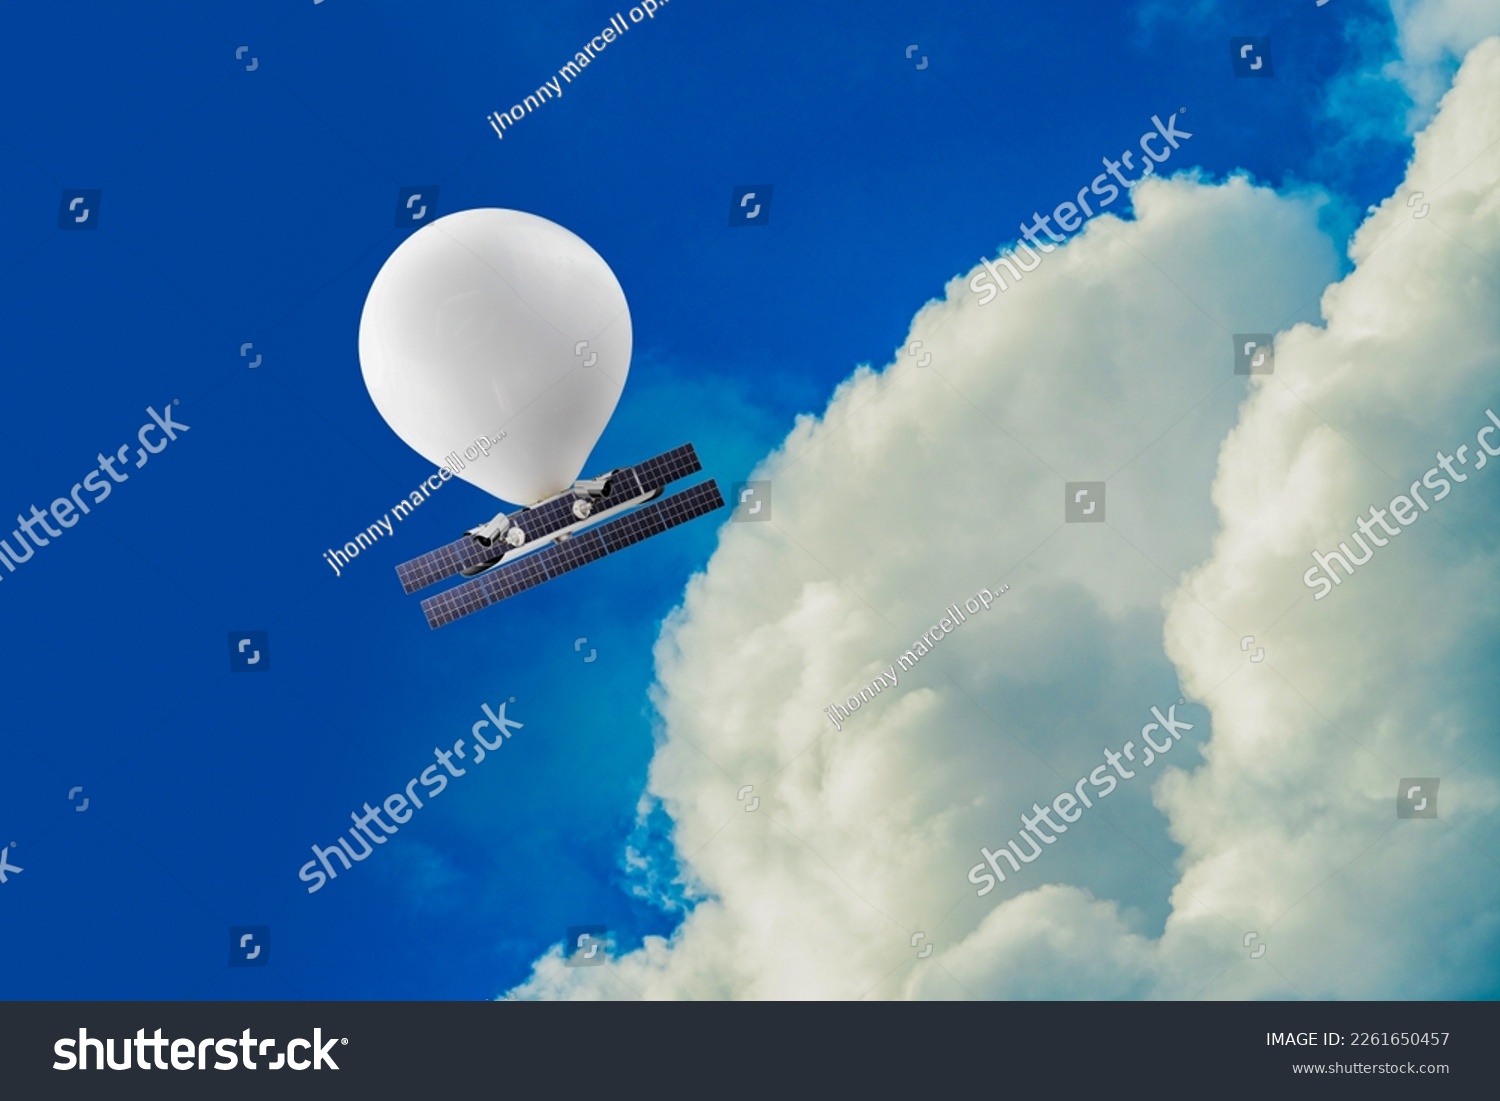 stratospheric balloon, complete with solar panels and cameras, travels at an altitude well above commercial air traffic in a blue sky #2261650457